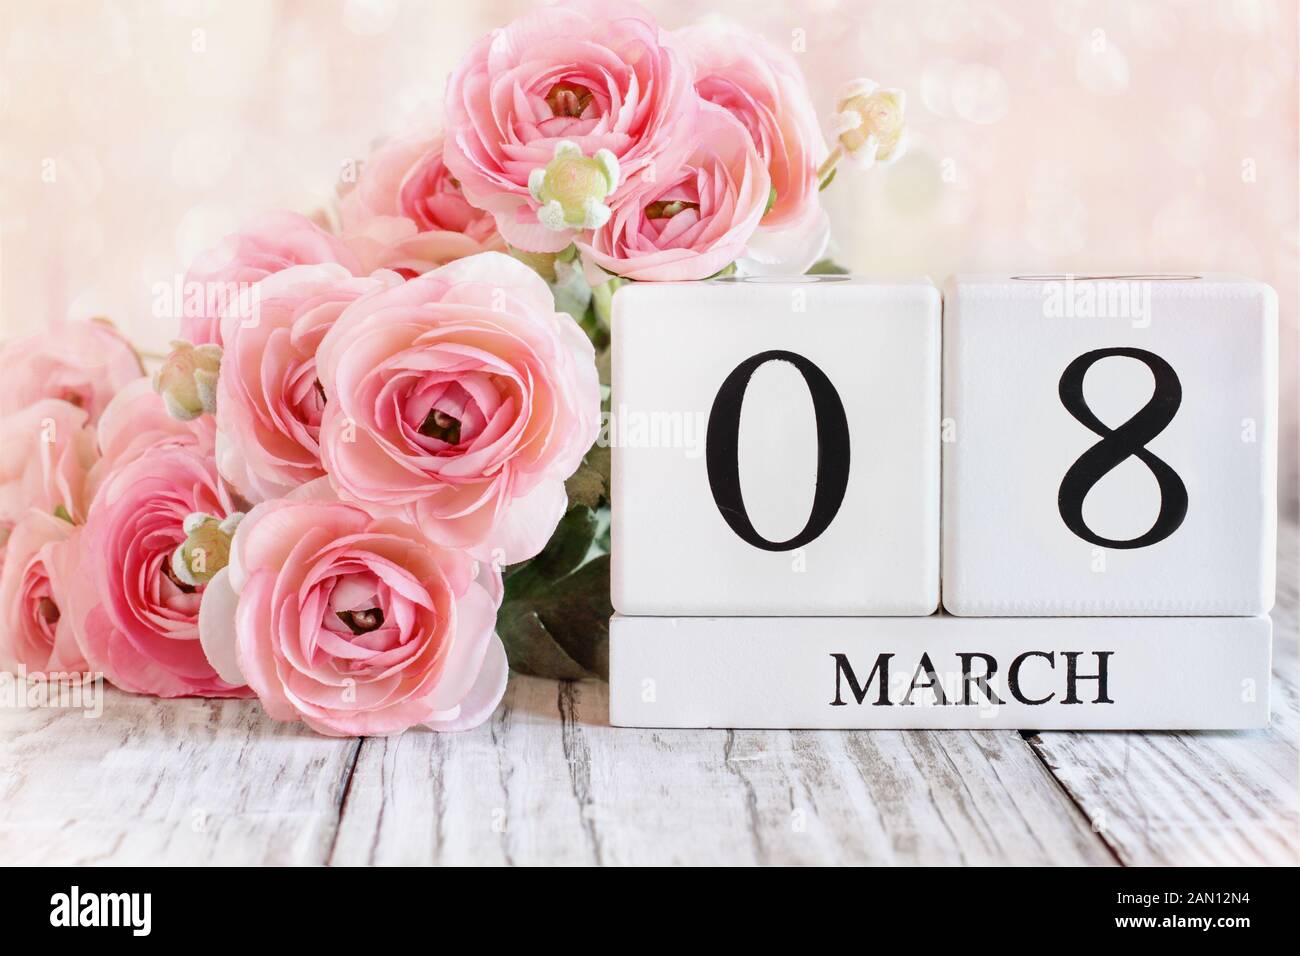 White wood calendar blocks with the date March 08 for International Women's Day and pink ranunculus flowers over a wooden table. Stock Photo